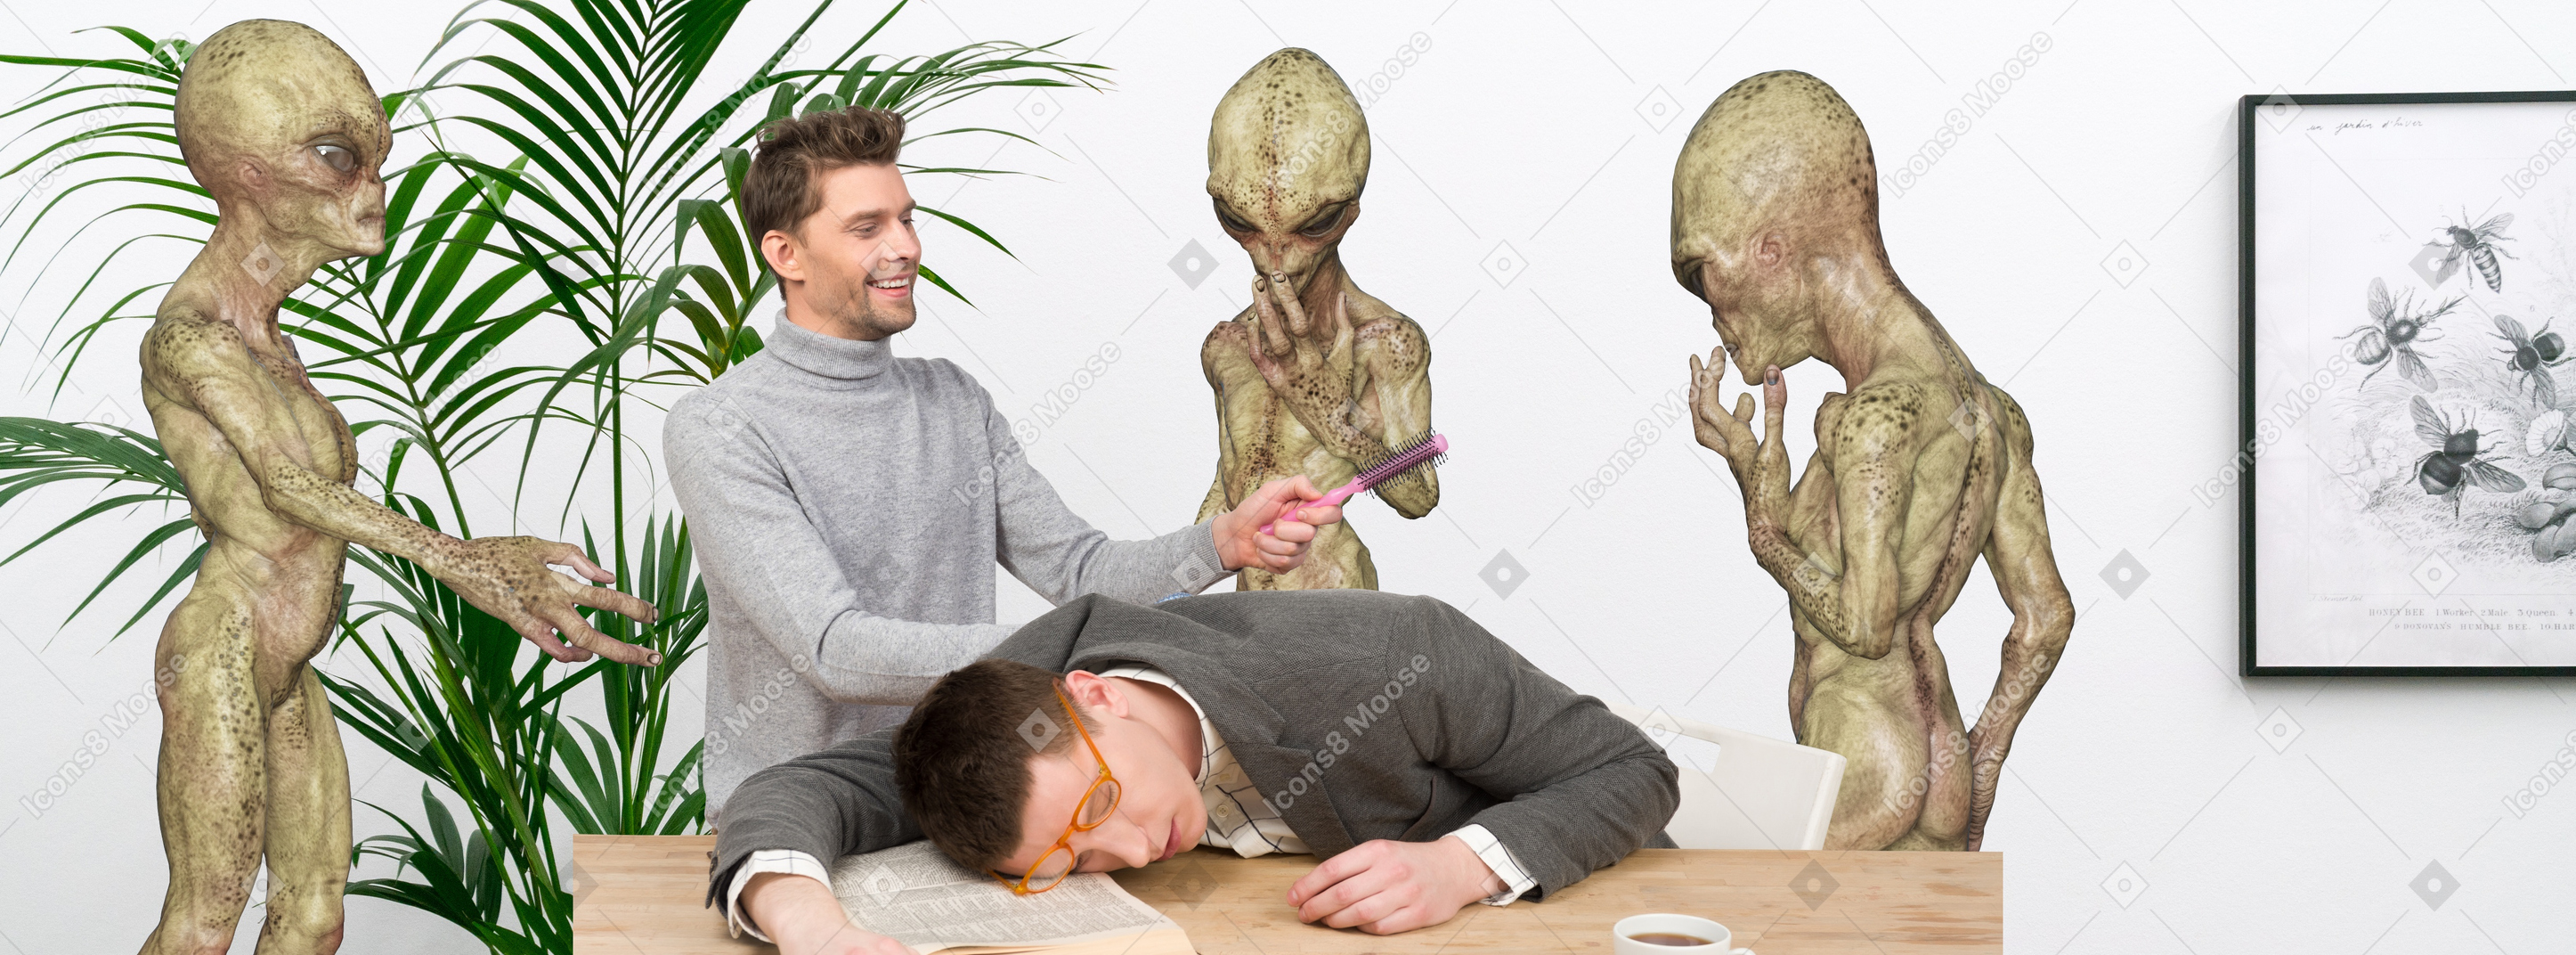 Man sleeping at desk with another man and group of aliens standing behind him